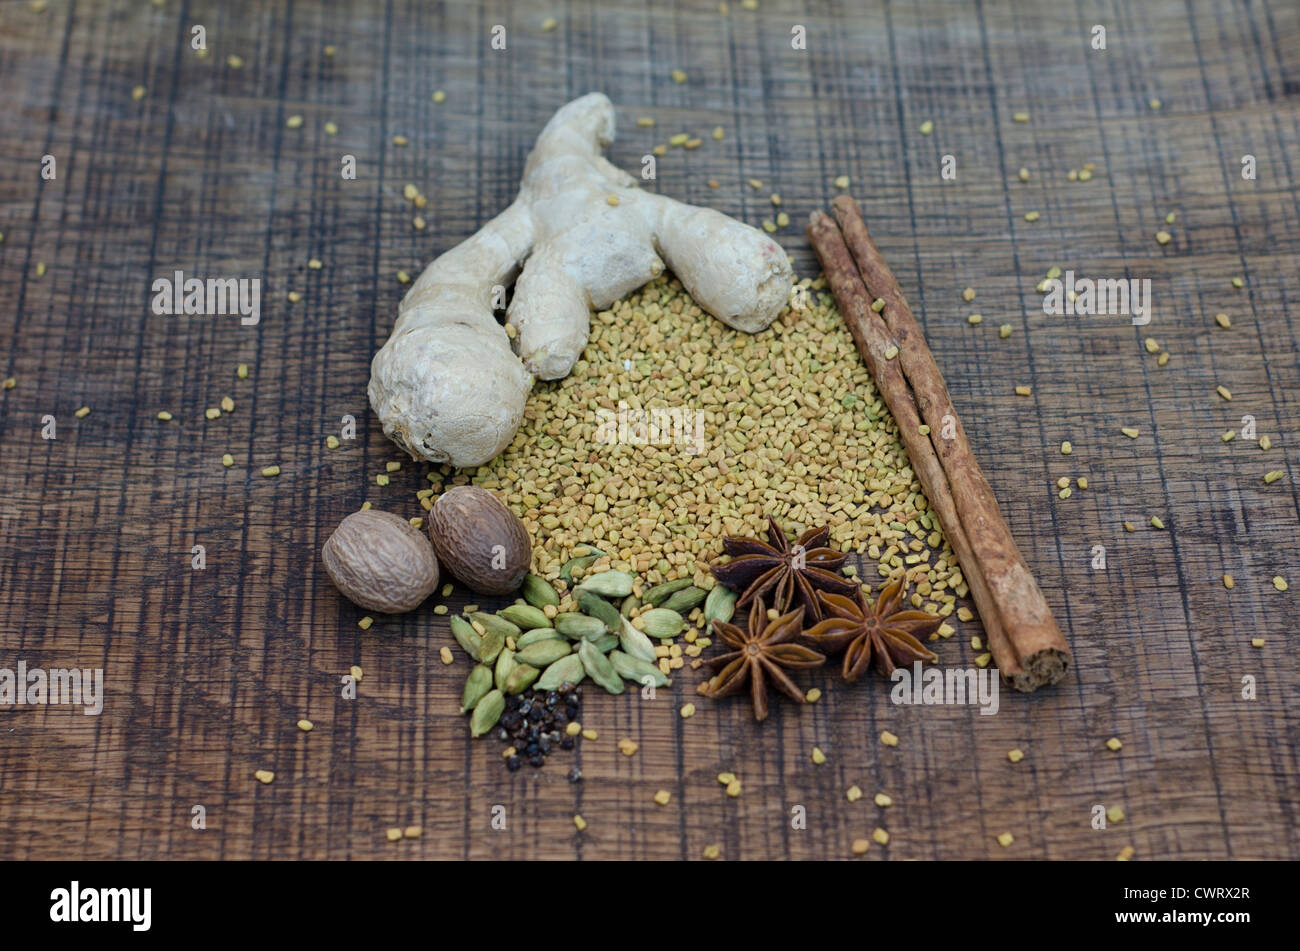 A selection of spices used in an ayurveda diet and healing, with healing spices and seeds. Stock Photo